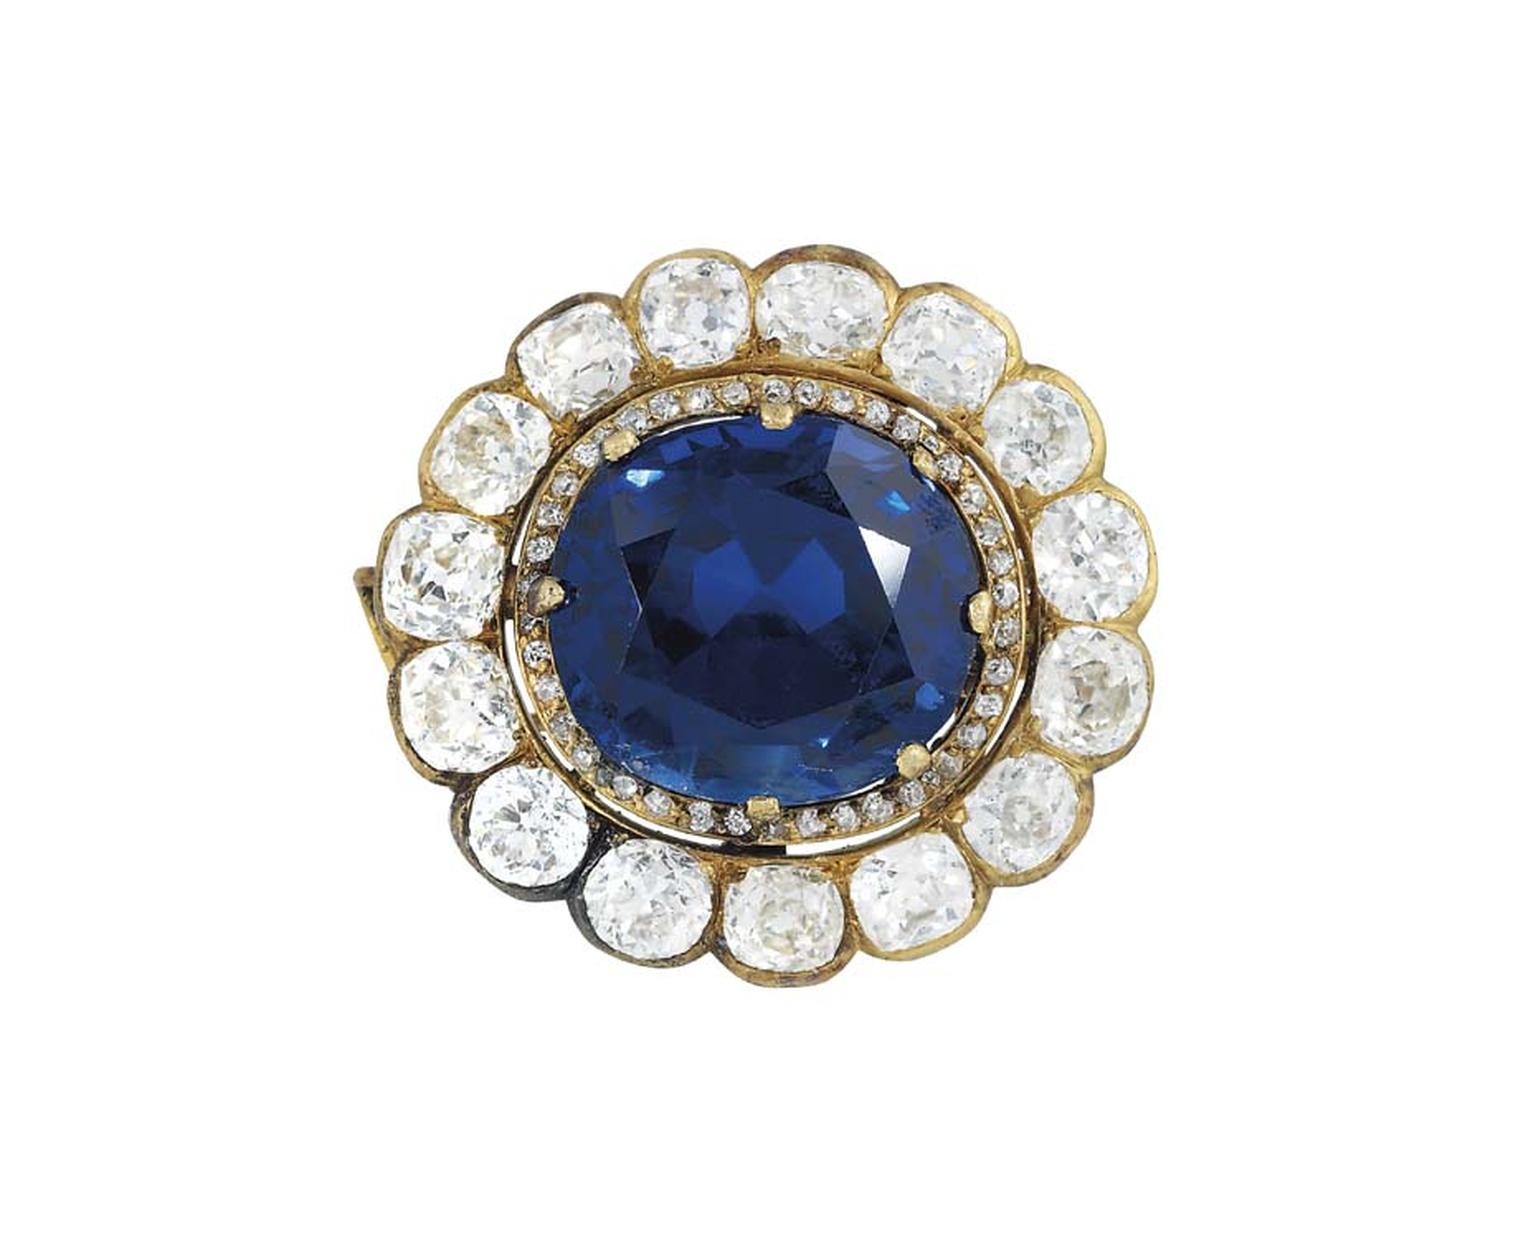 Lot 252 at Christie's sale of Important Jewels in London was a sapphire and diamond pendant set with a 41.00ct Burmese sapphire. It more than tripled its estimate to sell for £1,034,500 (estimate £200,000-300,000).